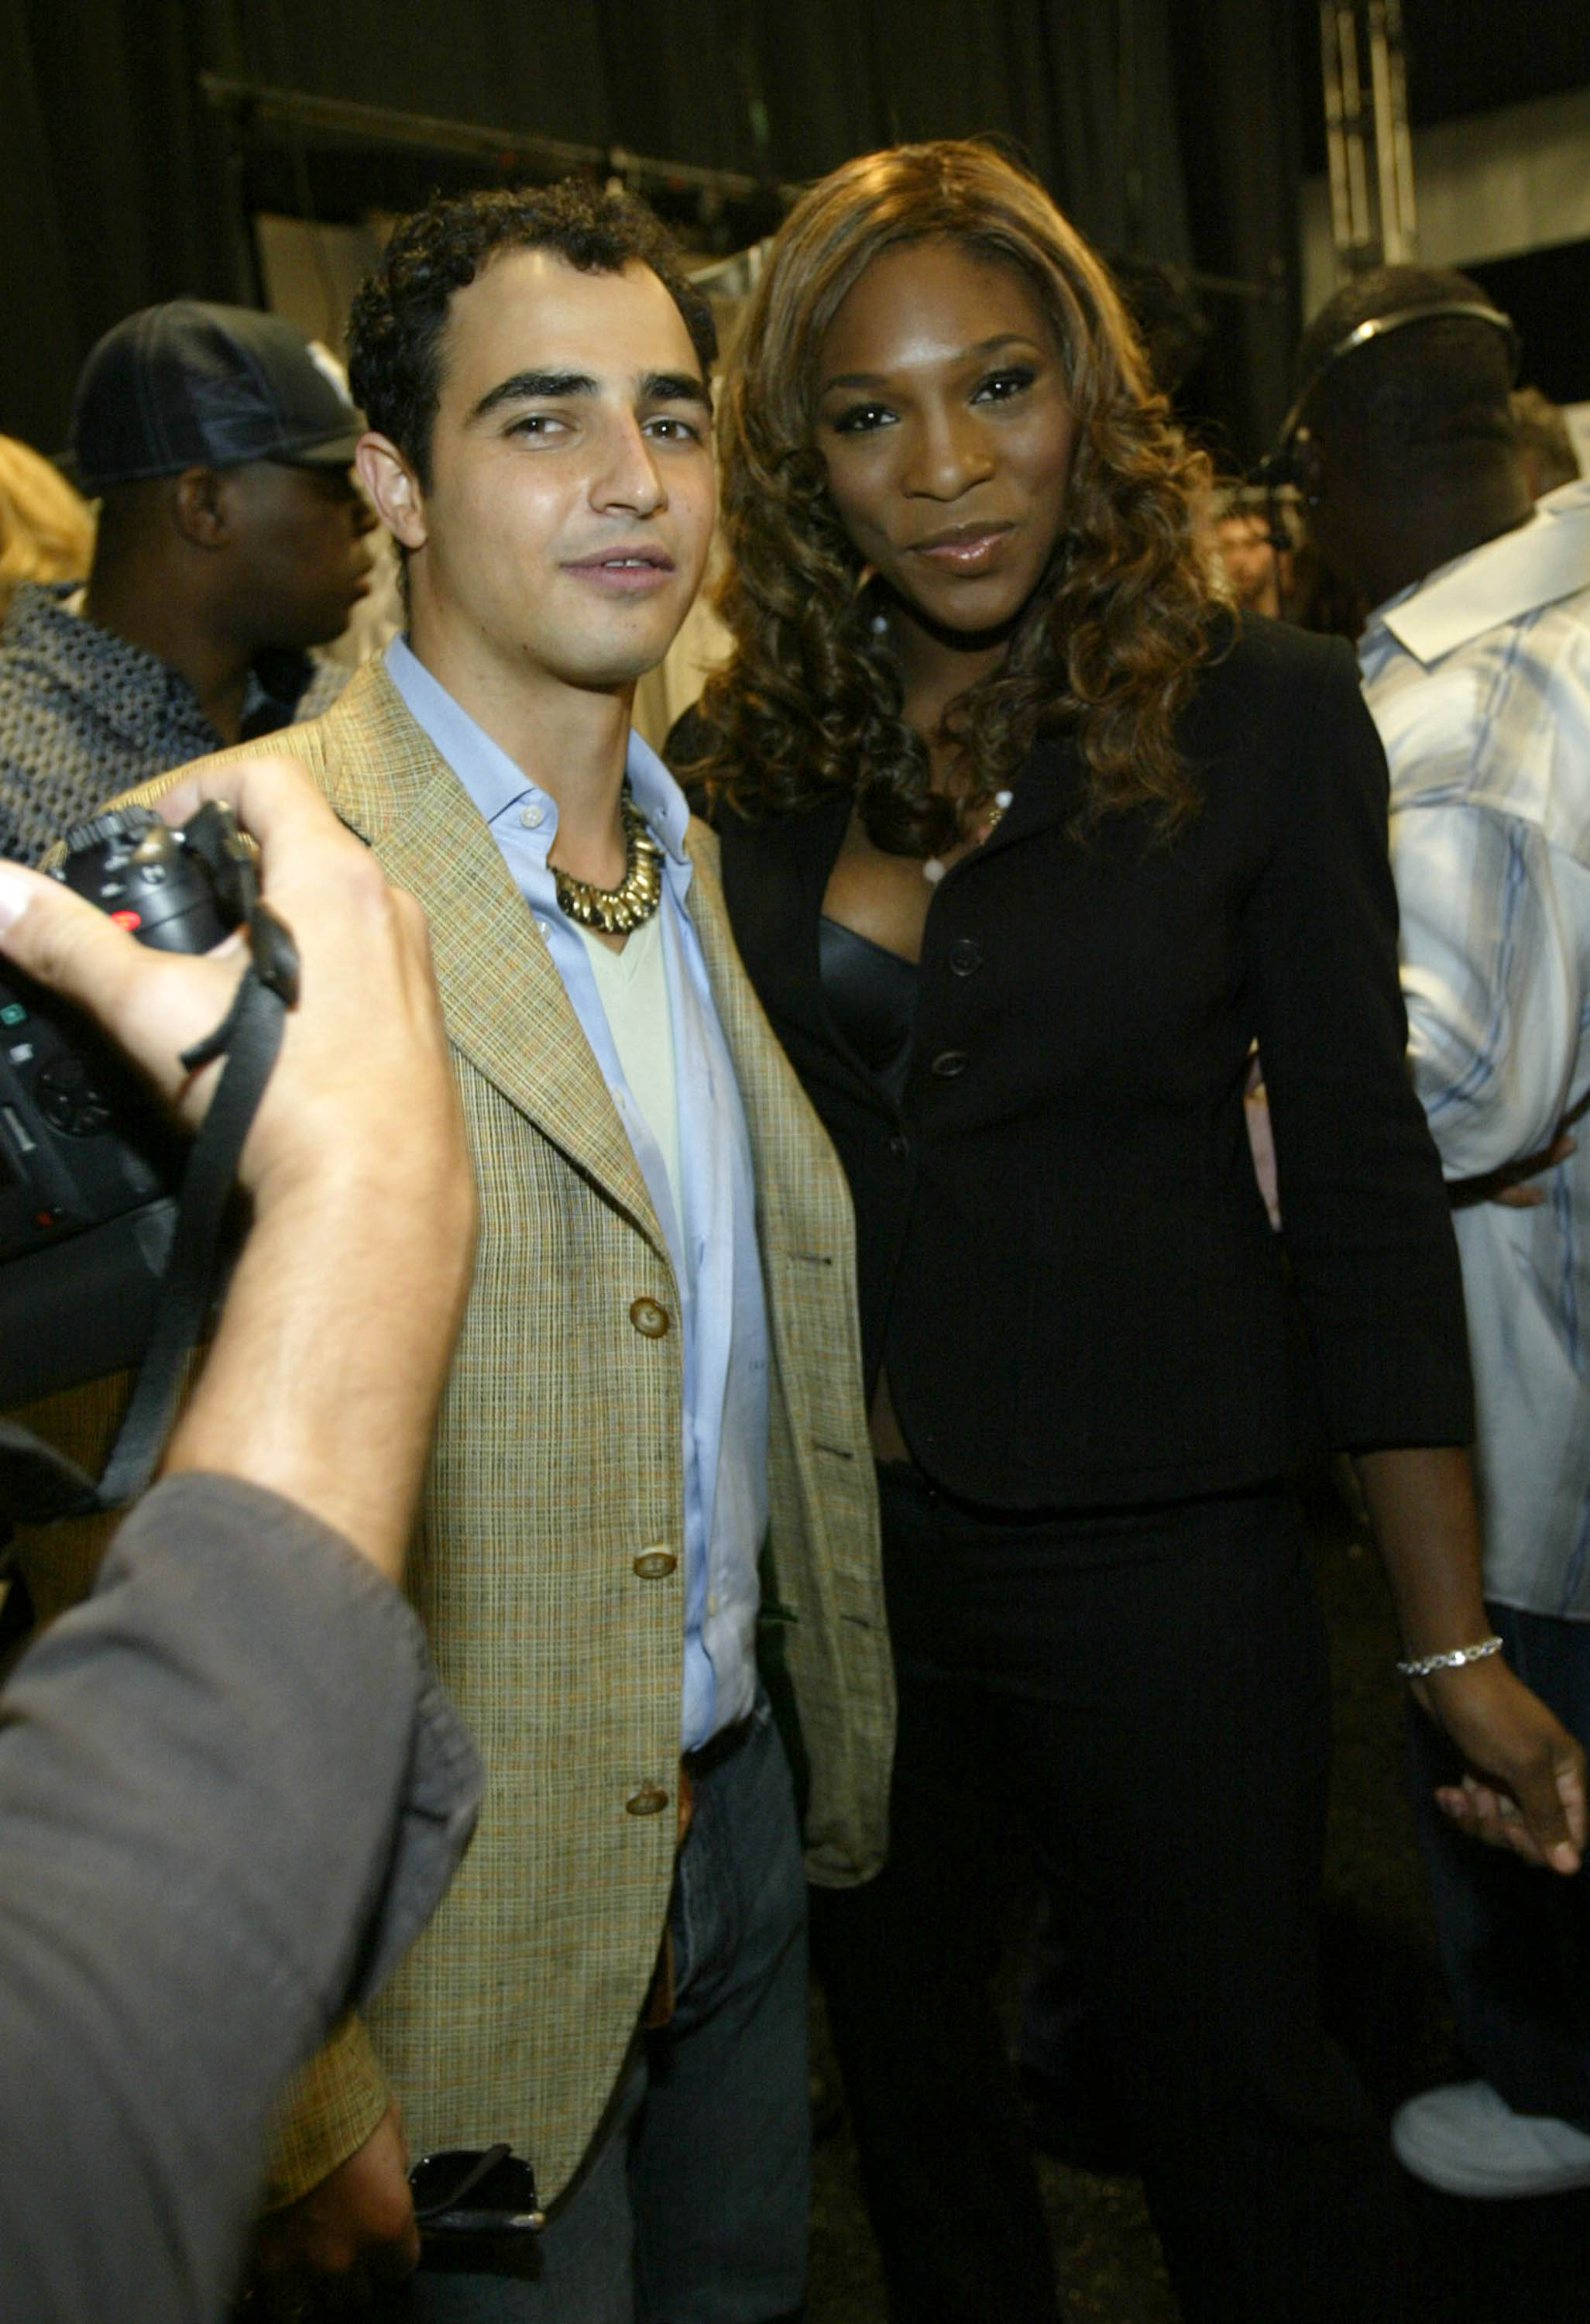 Zac Posen and tennis star Serena Williams pose for a photo backstage during the Zac Posen show during Olympus Fashion Week Spring 2005 at the Theatre in Bryant in September 2004. Photo: AFP